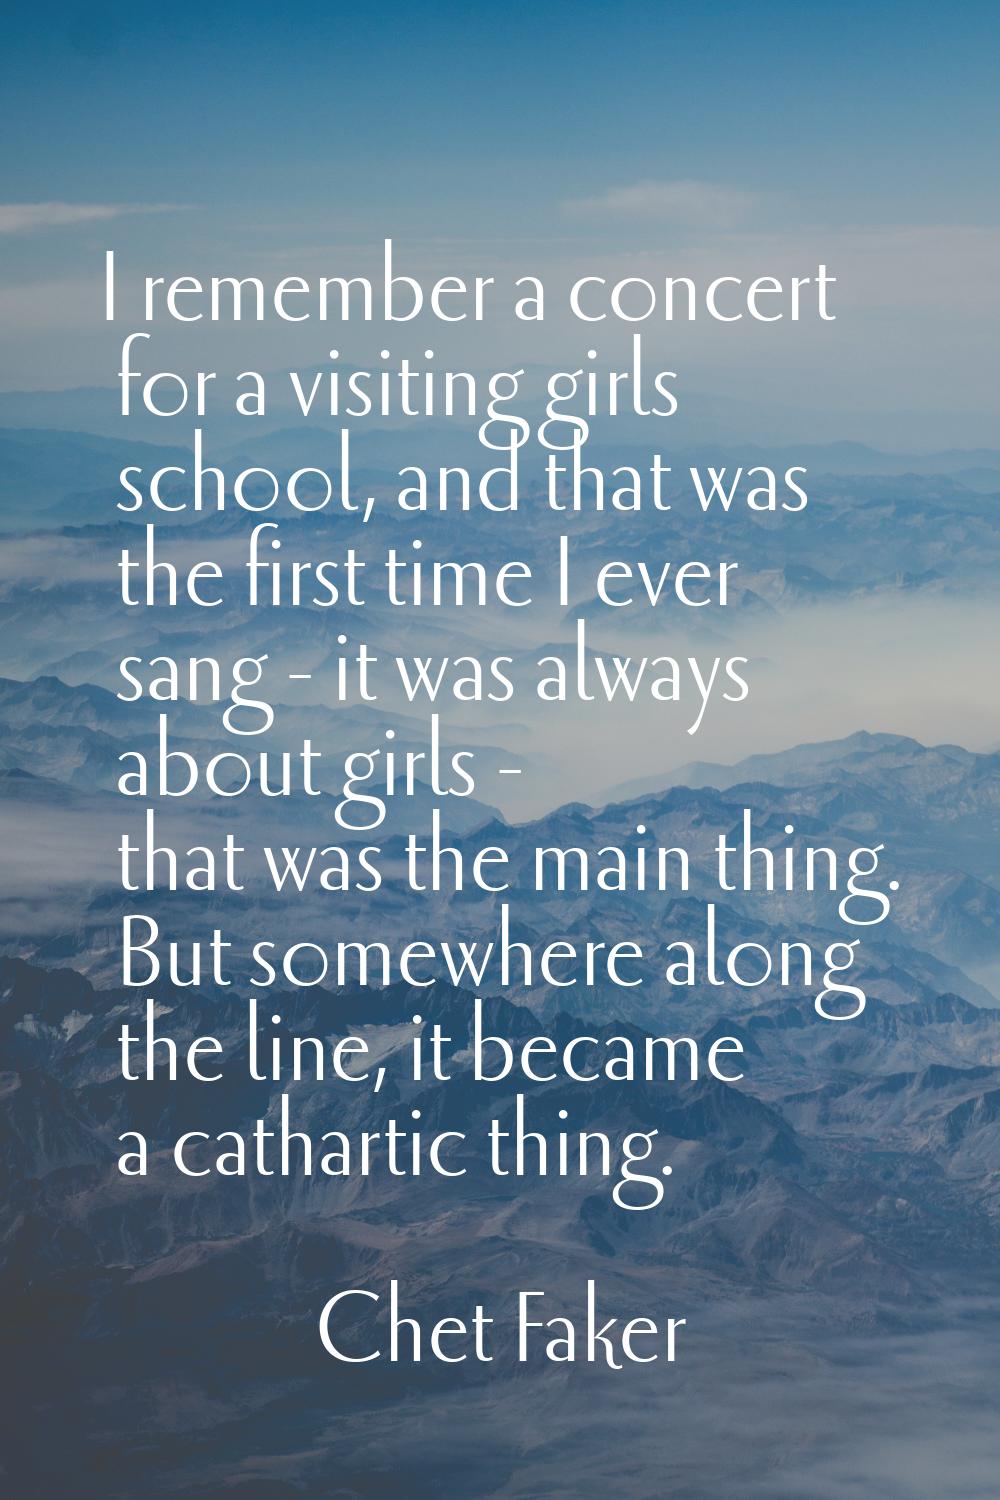 I remember a concert for a visiting girls school, and that was the first time I ever sang - it was 